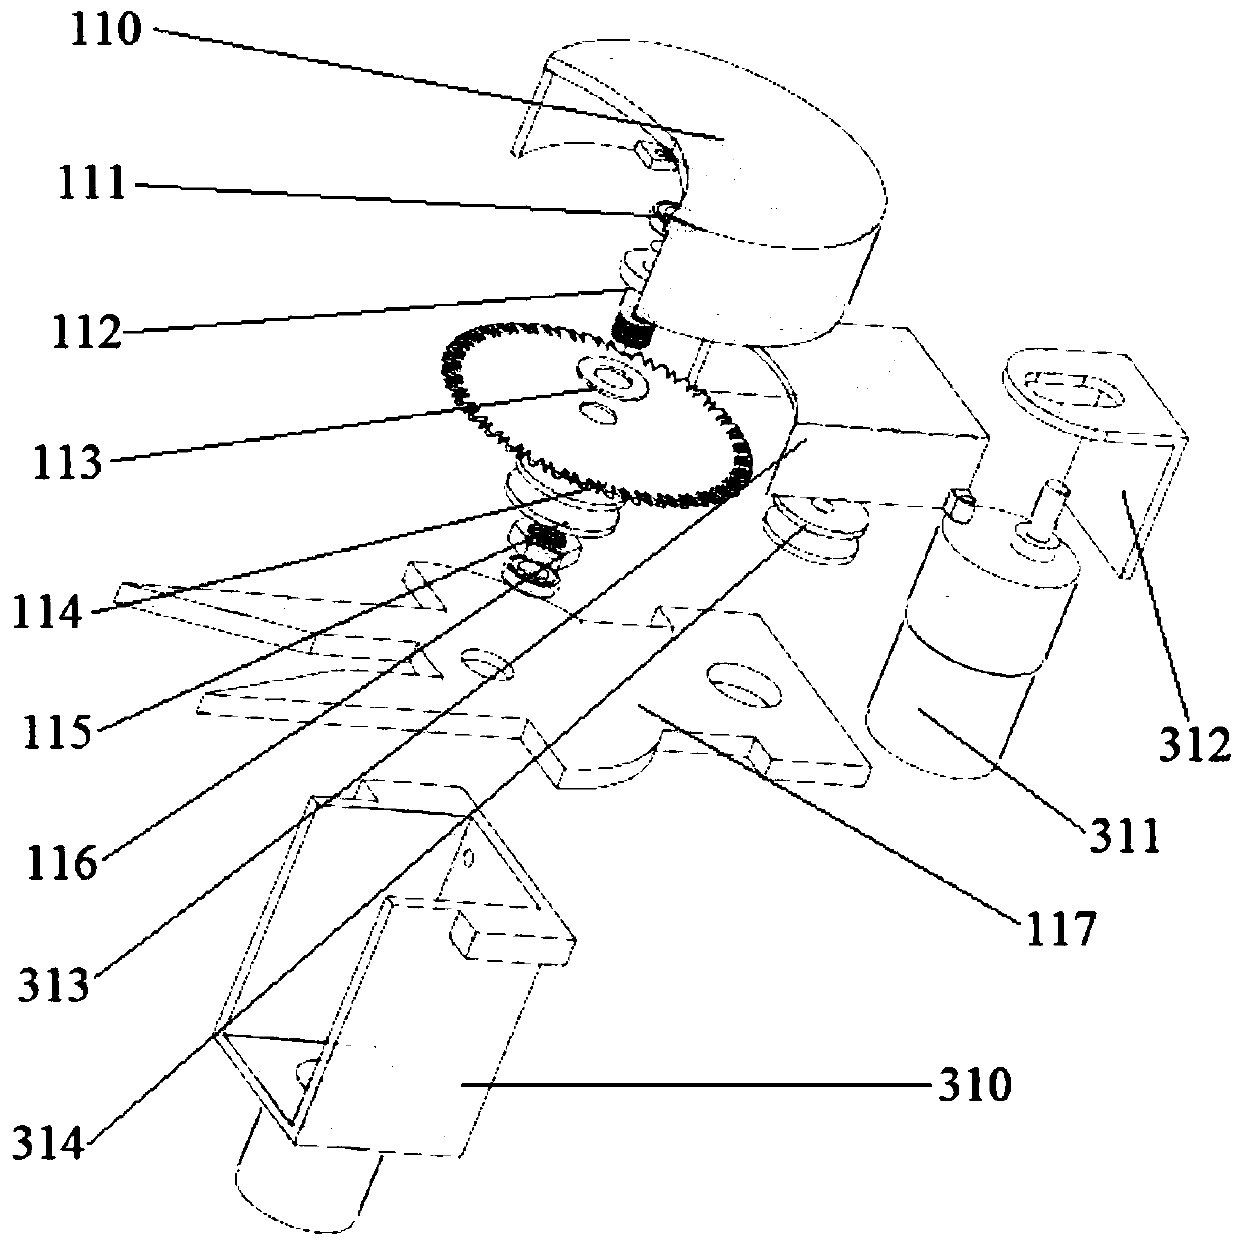 Fruit picking and collecting device